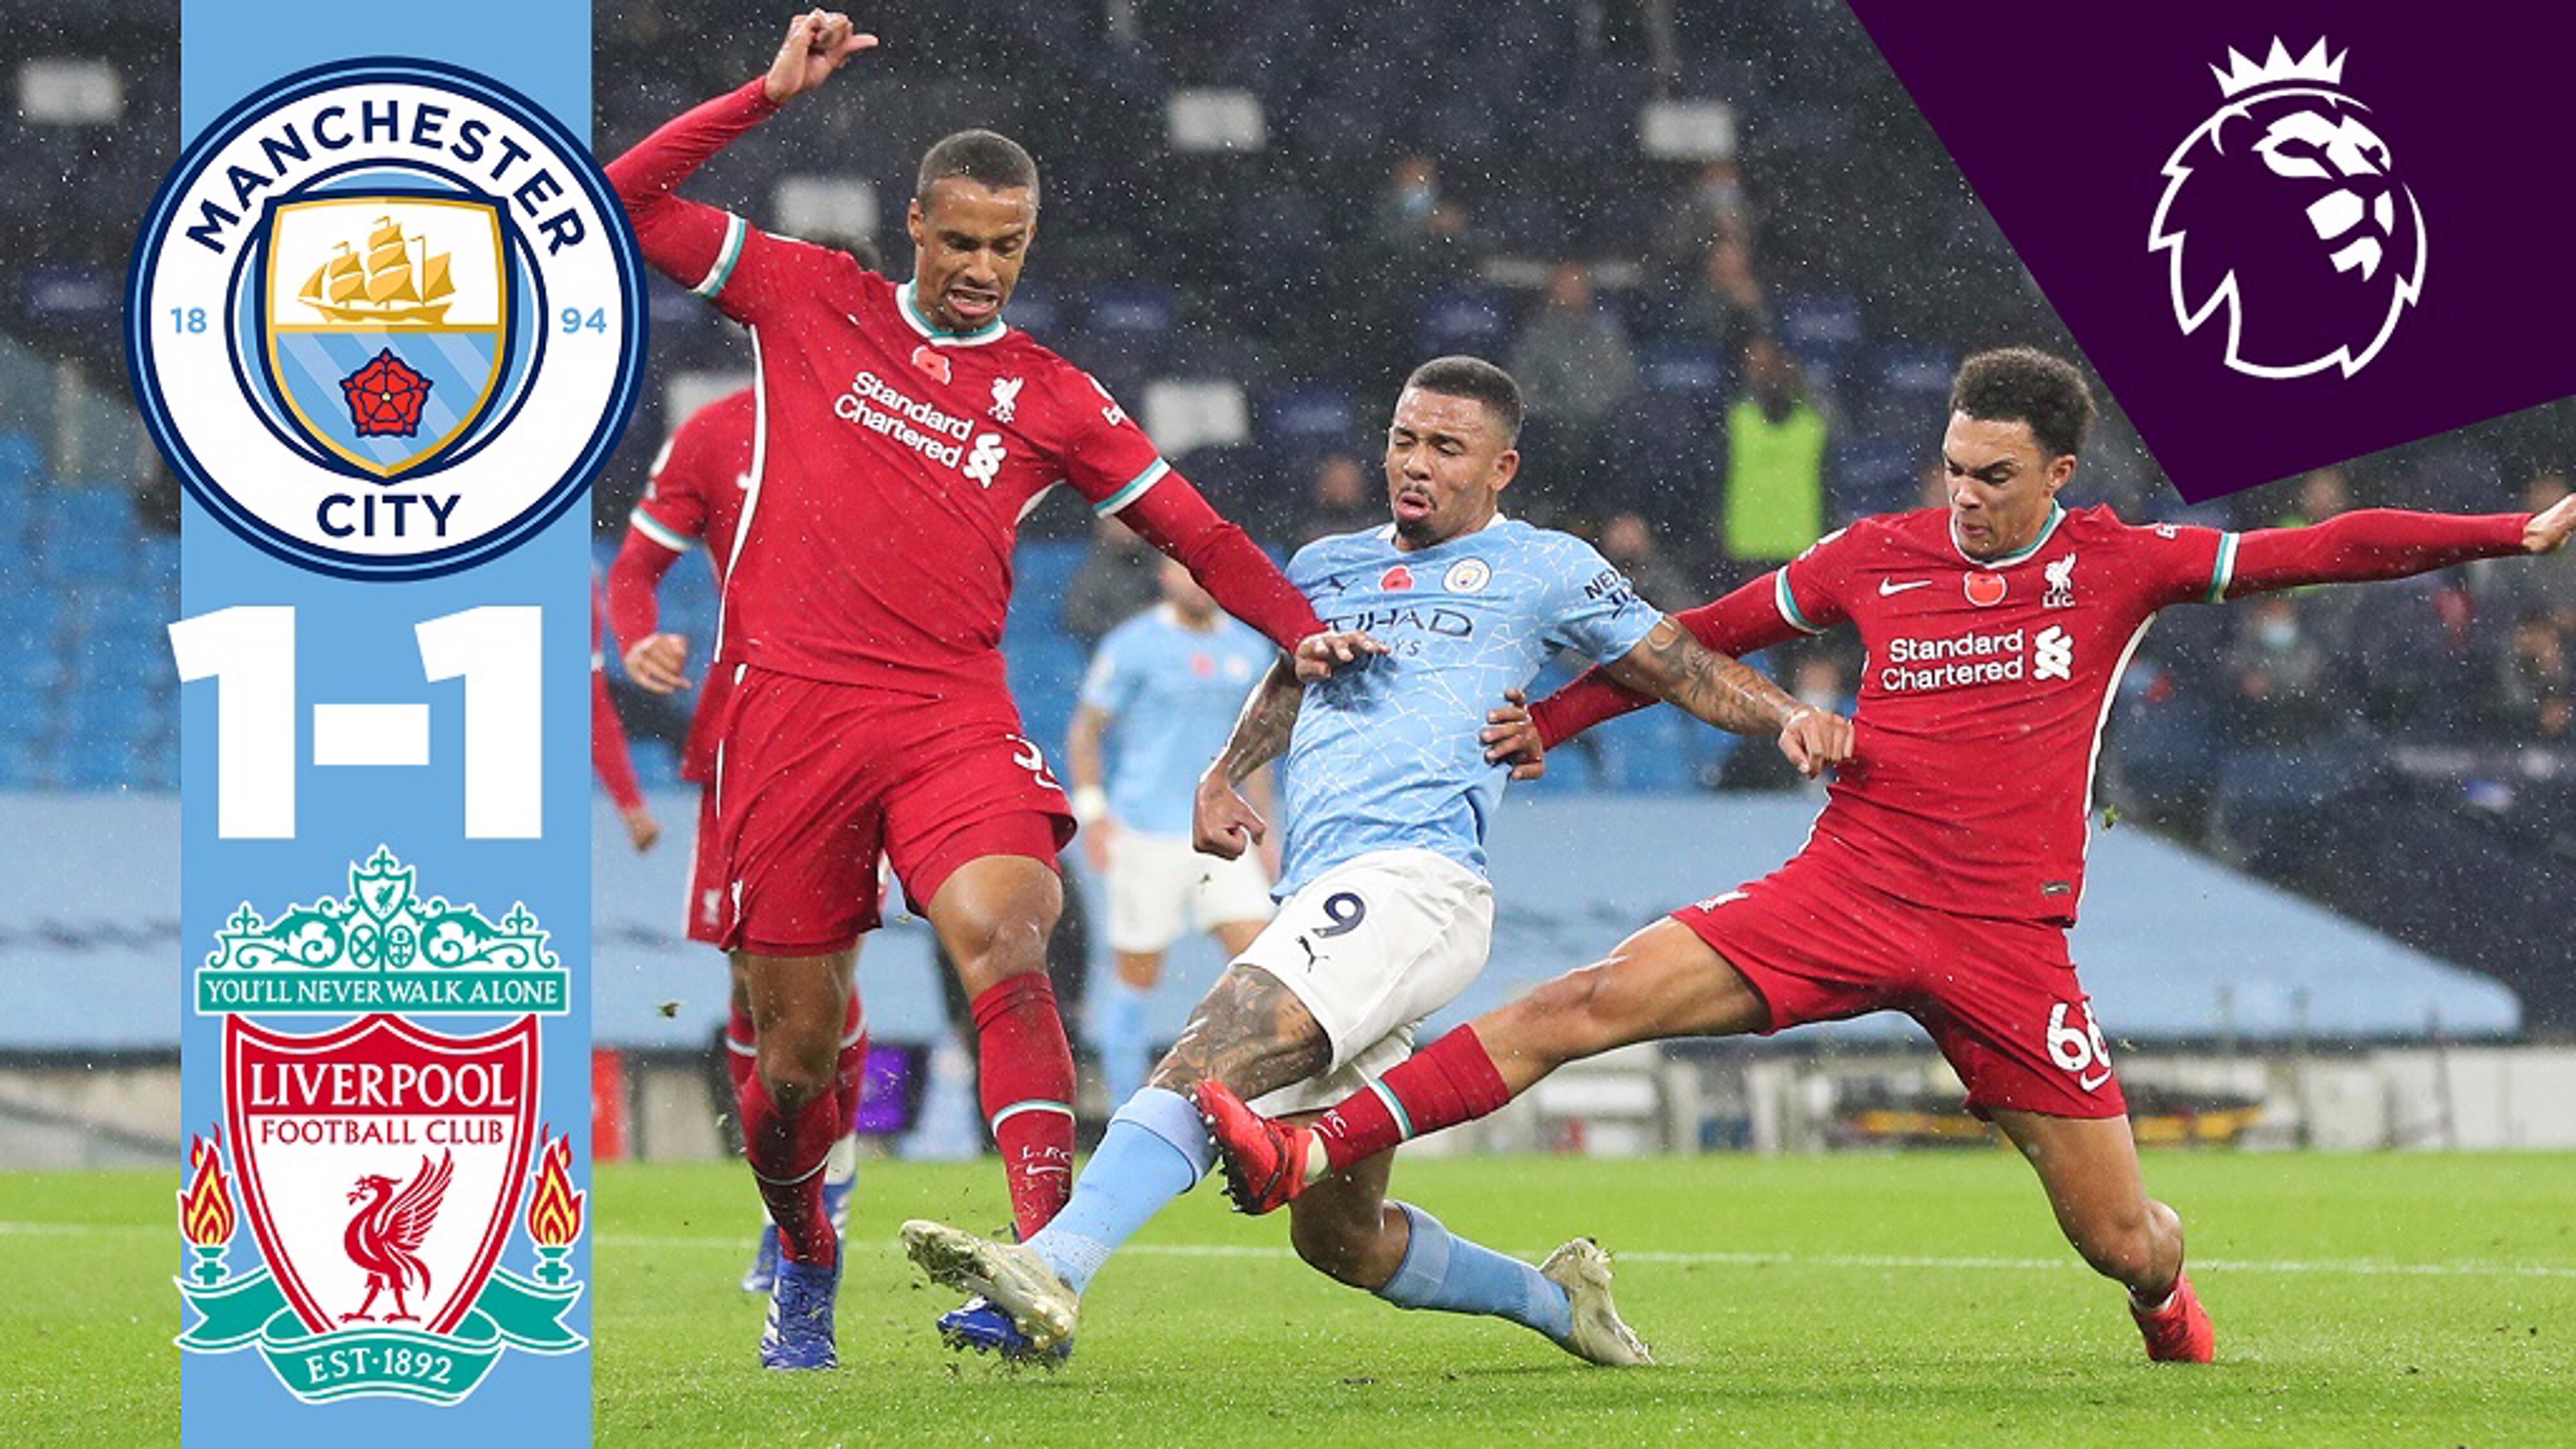 City 1-1 Liverpool Extended highlights